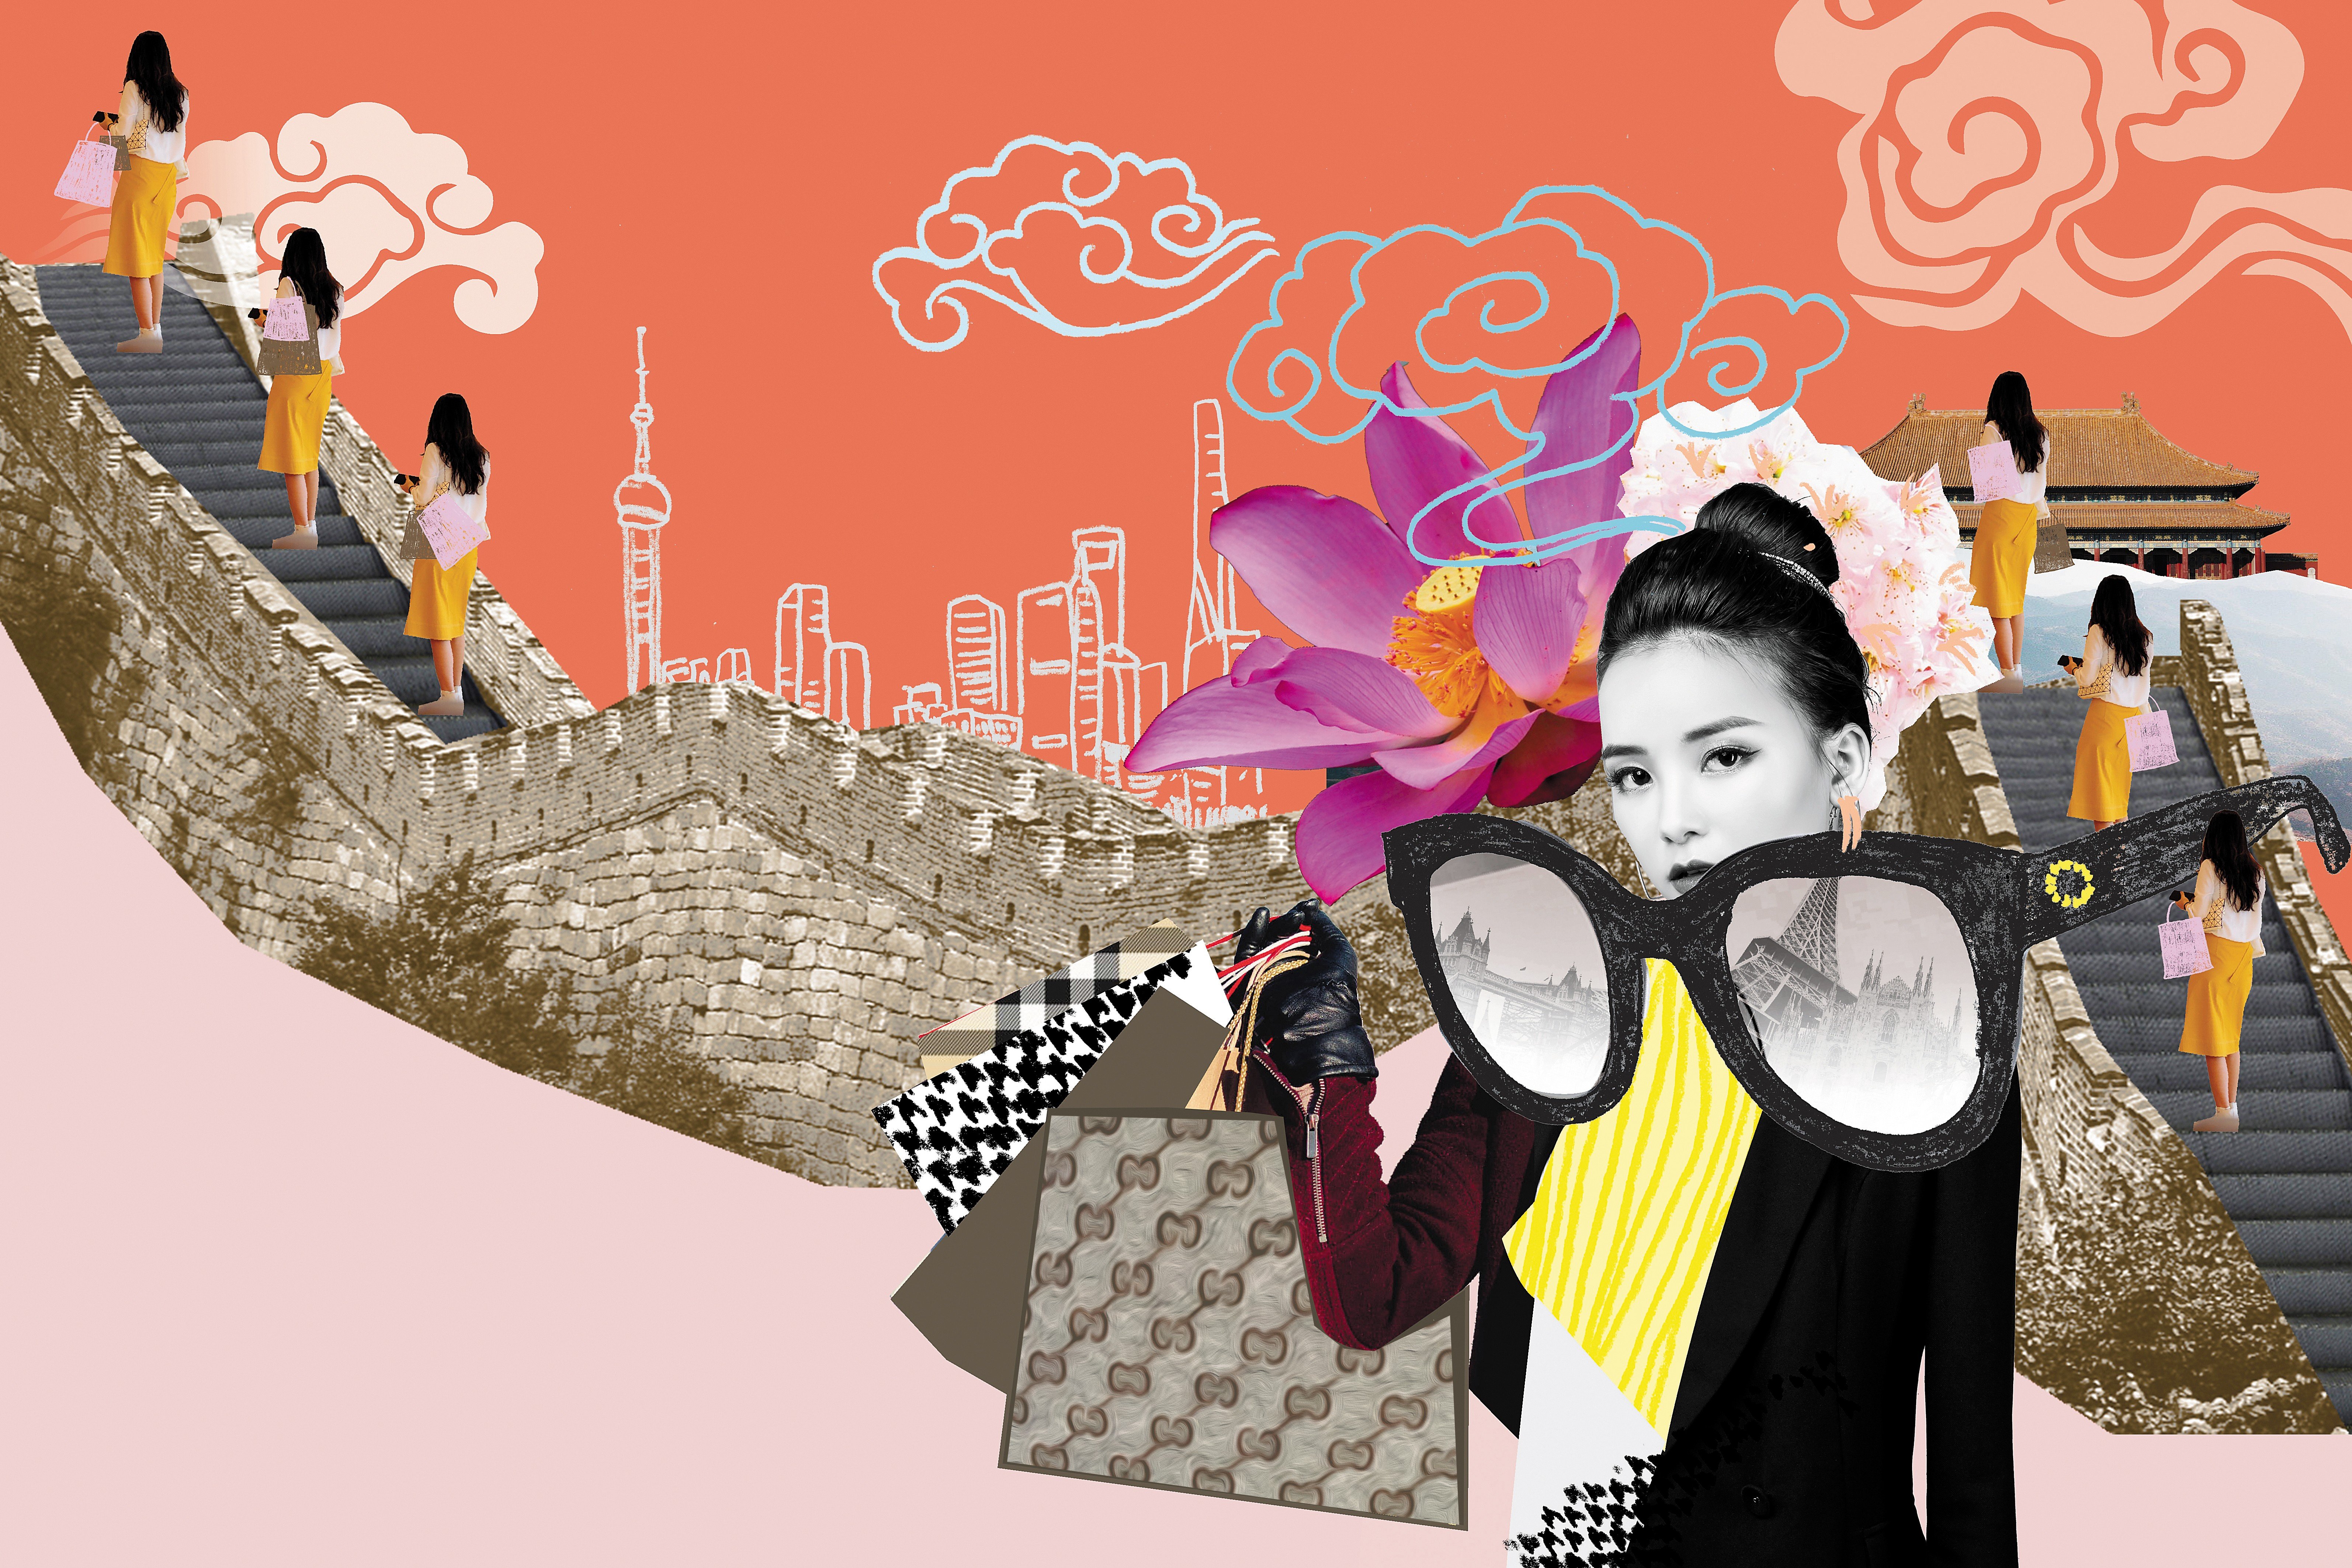 China is the world’s largest luxury goods market, and by 2025 will account for nearly half of global purchases – so brands cannot afford marketing blunders that anger their chief moneymaker. Illustration: Tanya Cooper